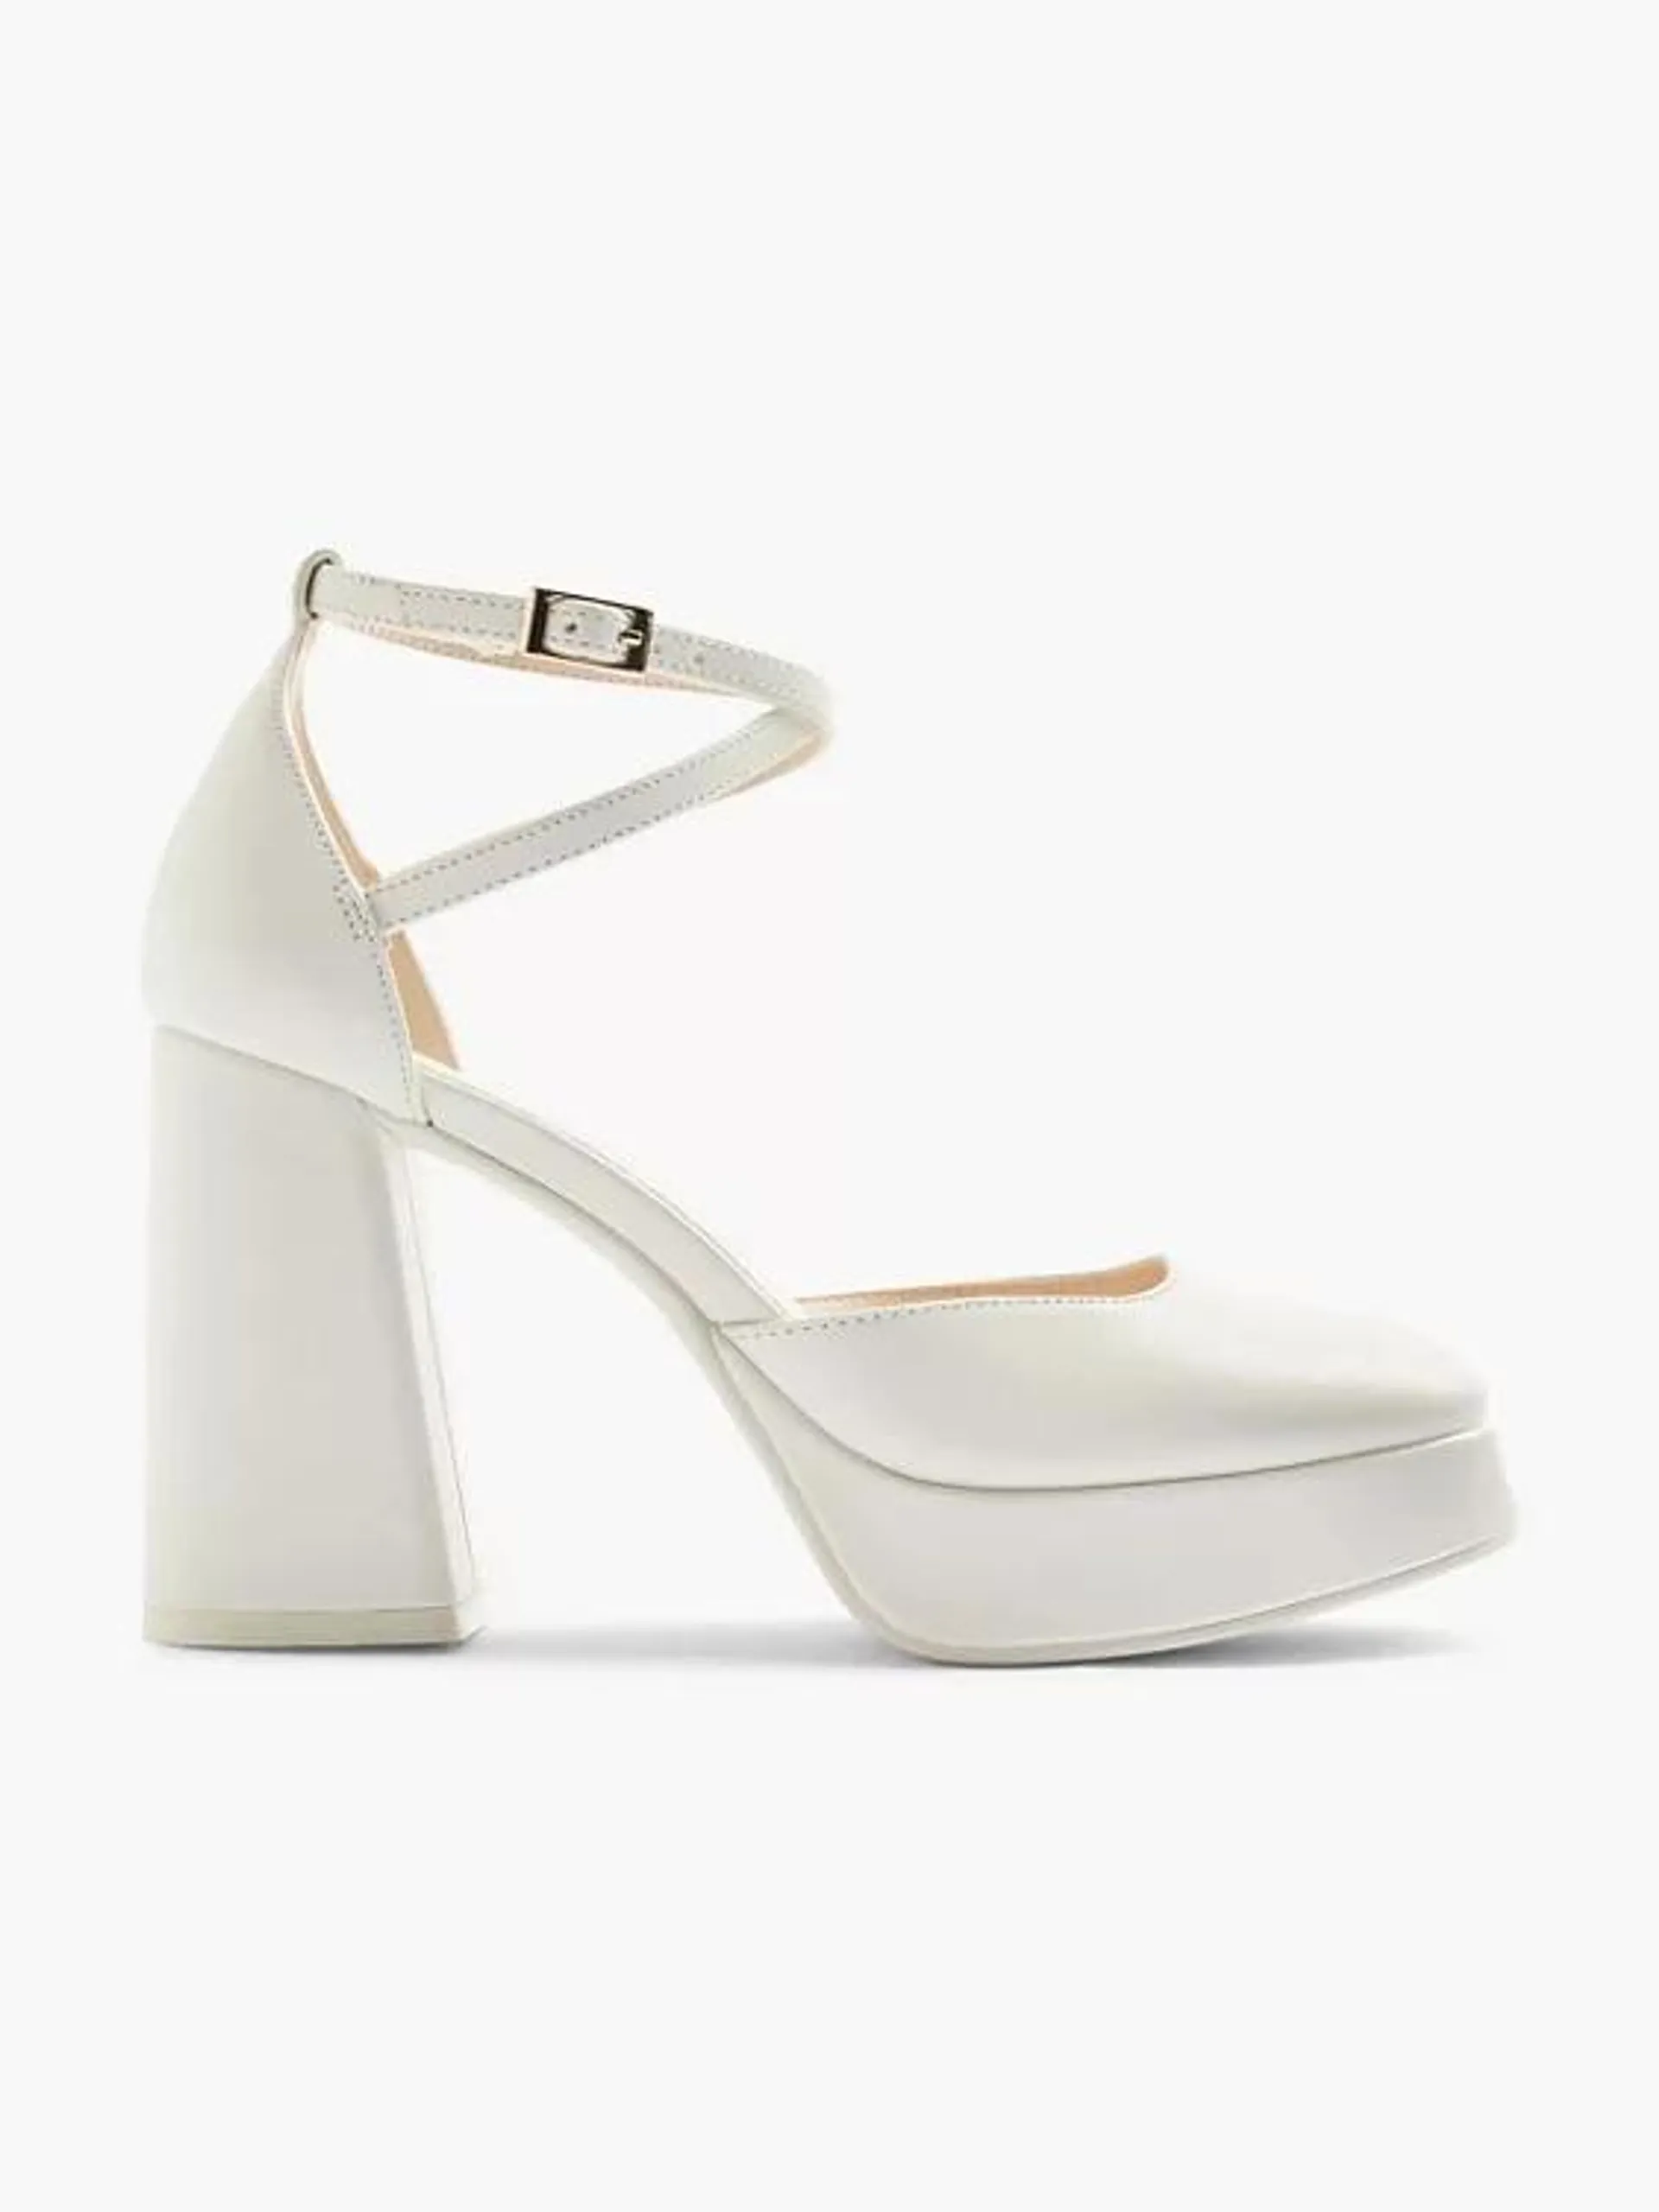 White Platform Heels With Ankle Strap